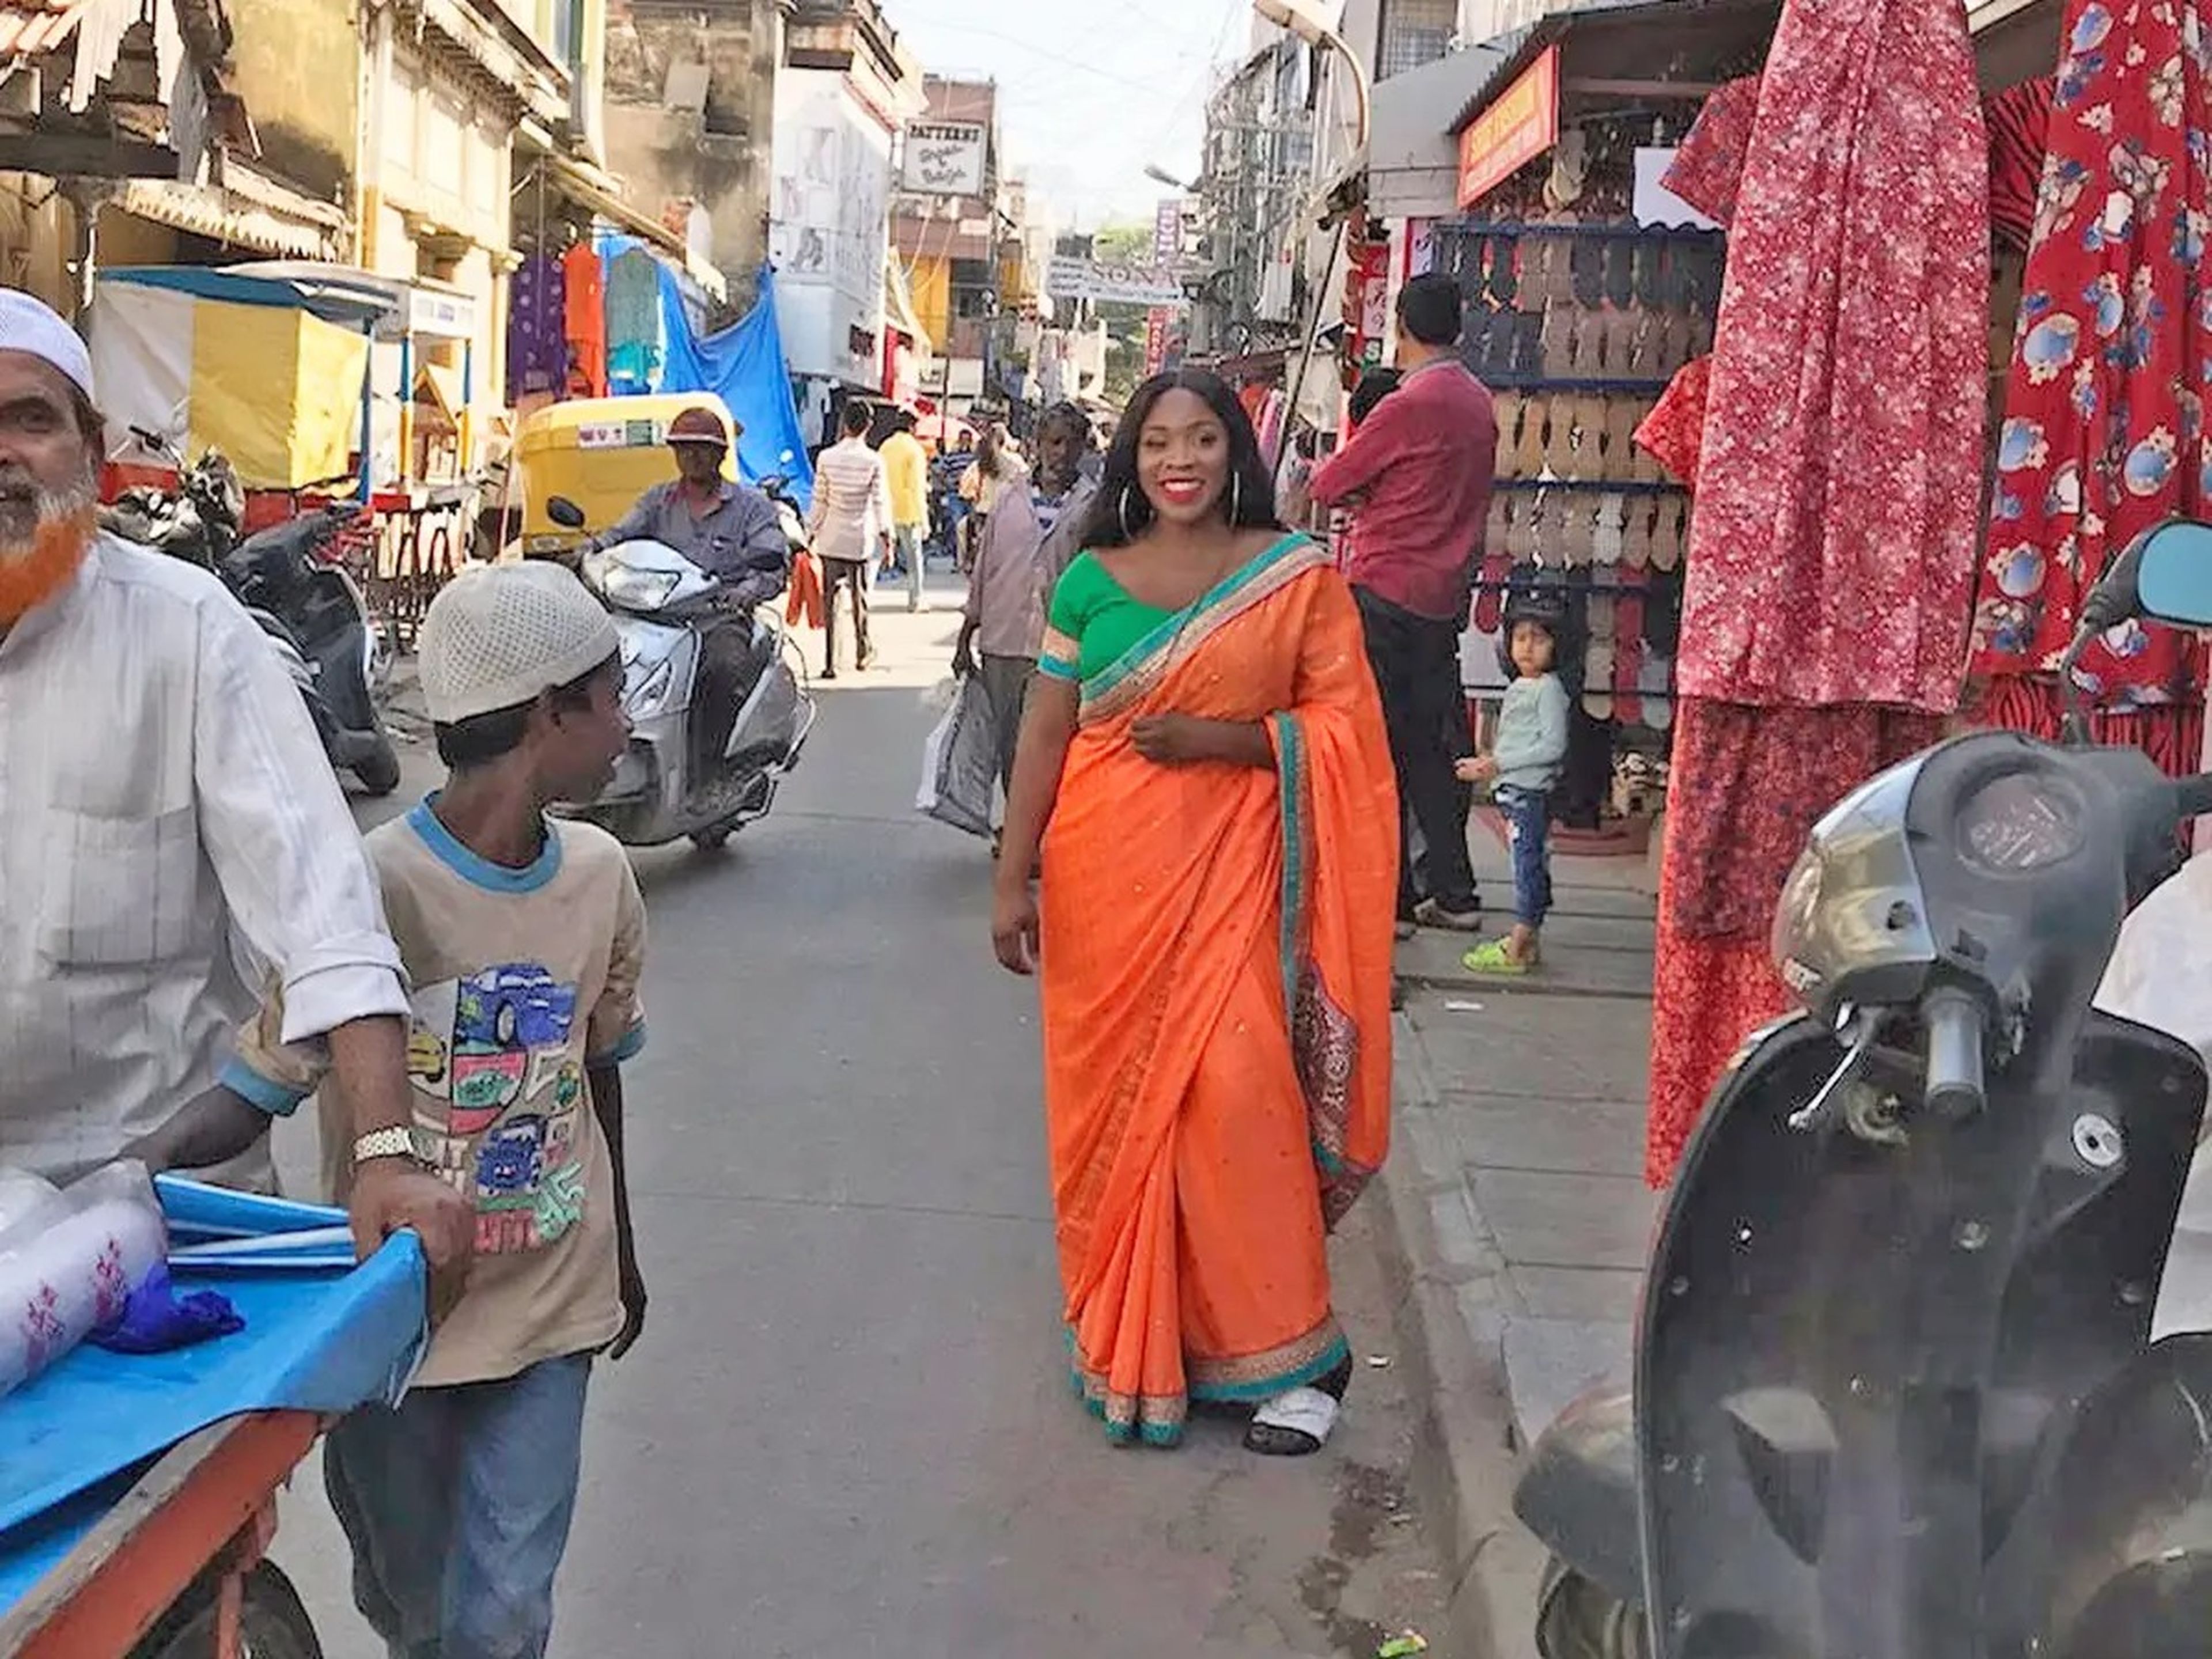 Photo of the writer in an orange sari and green shirt at a market full of vendors